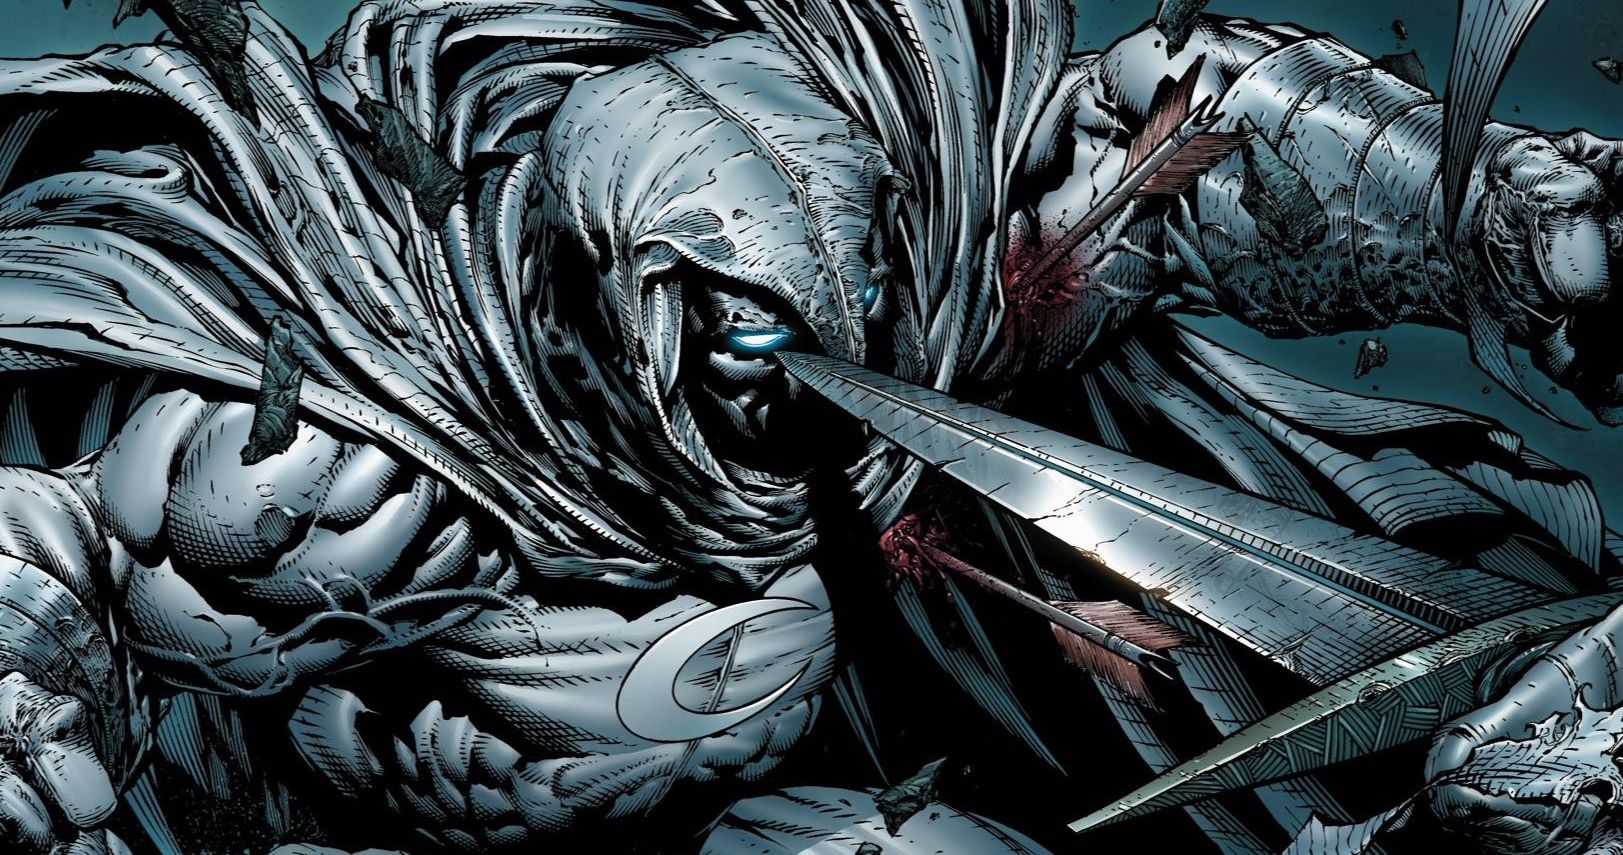 Marvel's Moon Knight Brings in Synchronic Directors, Filming Begins This Spring